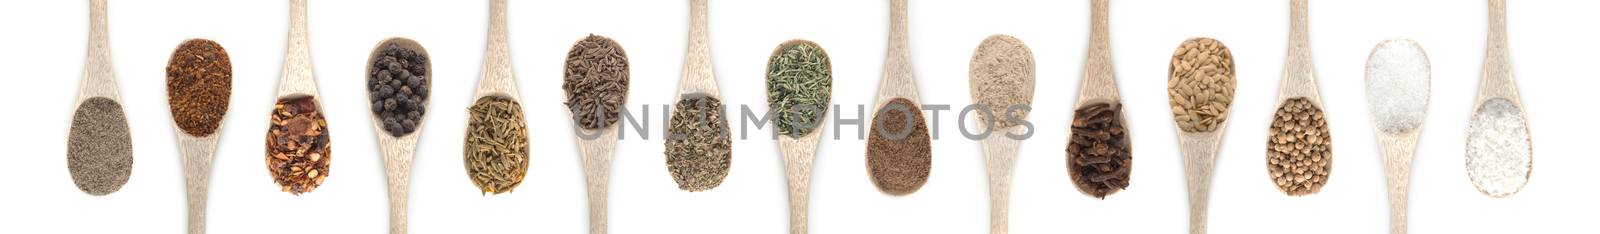 Spices Set in spoons isolated on white background. Top view.